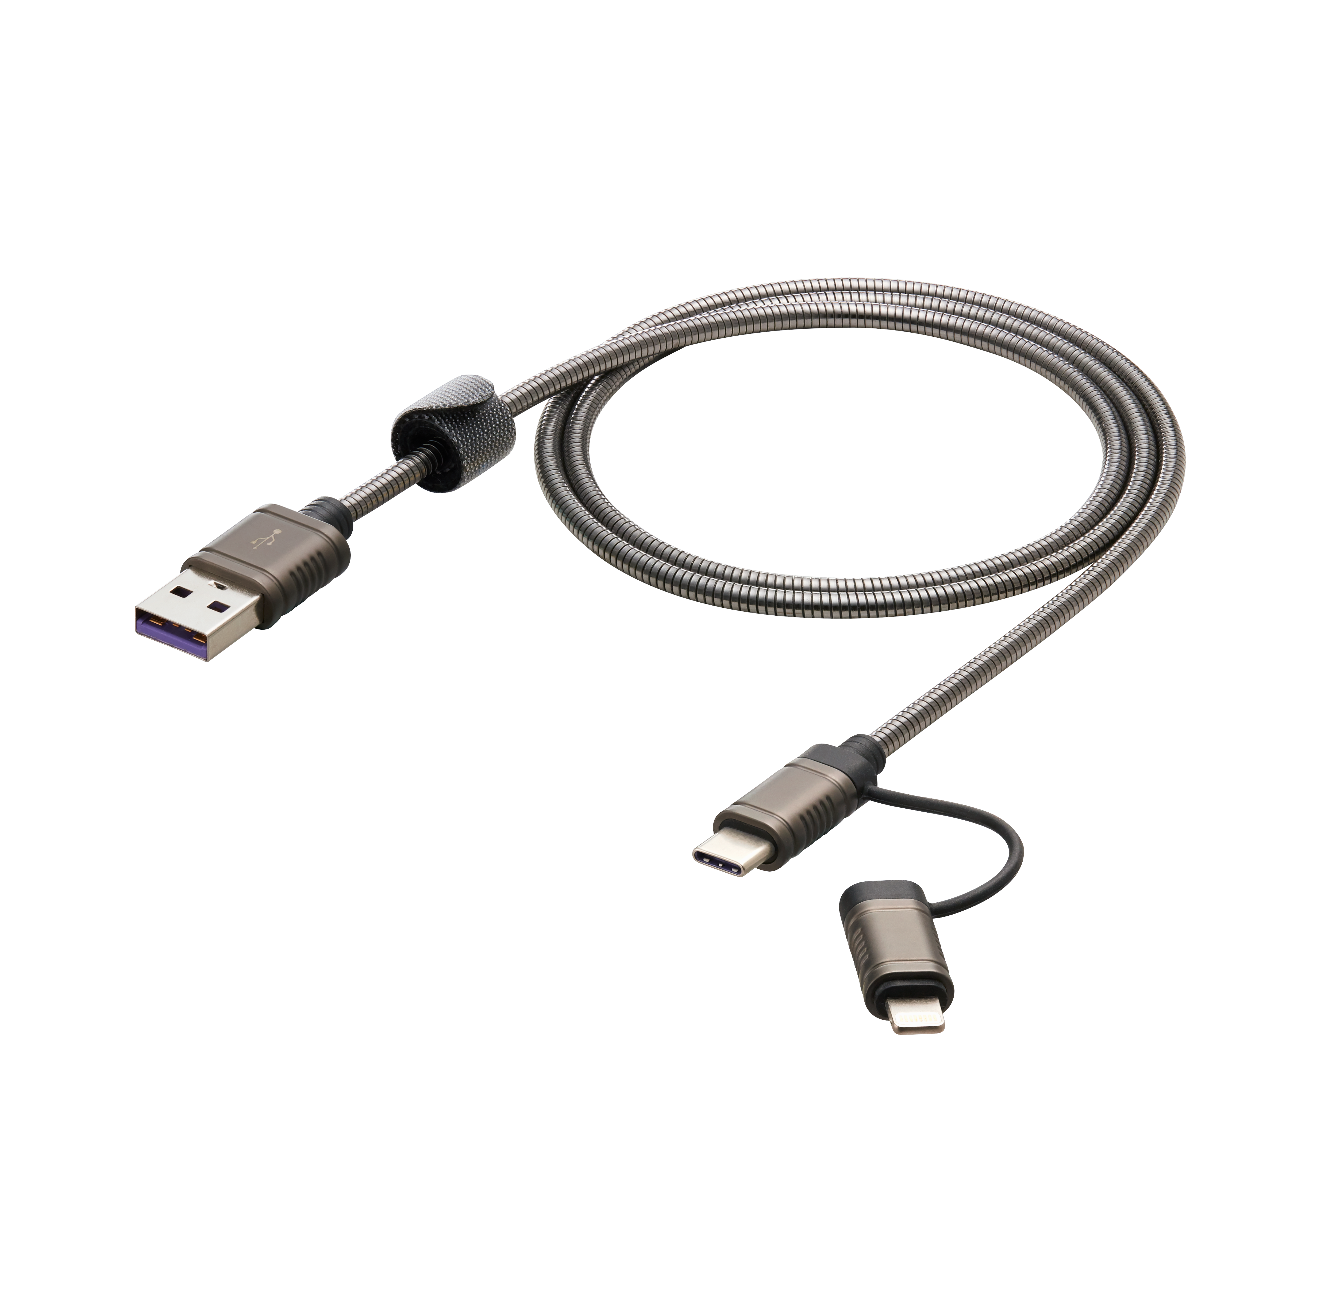 2 in 1 USB 3.0 to Type-C to Lighting